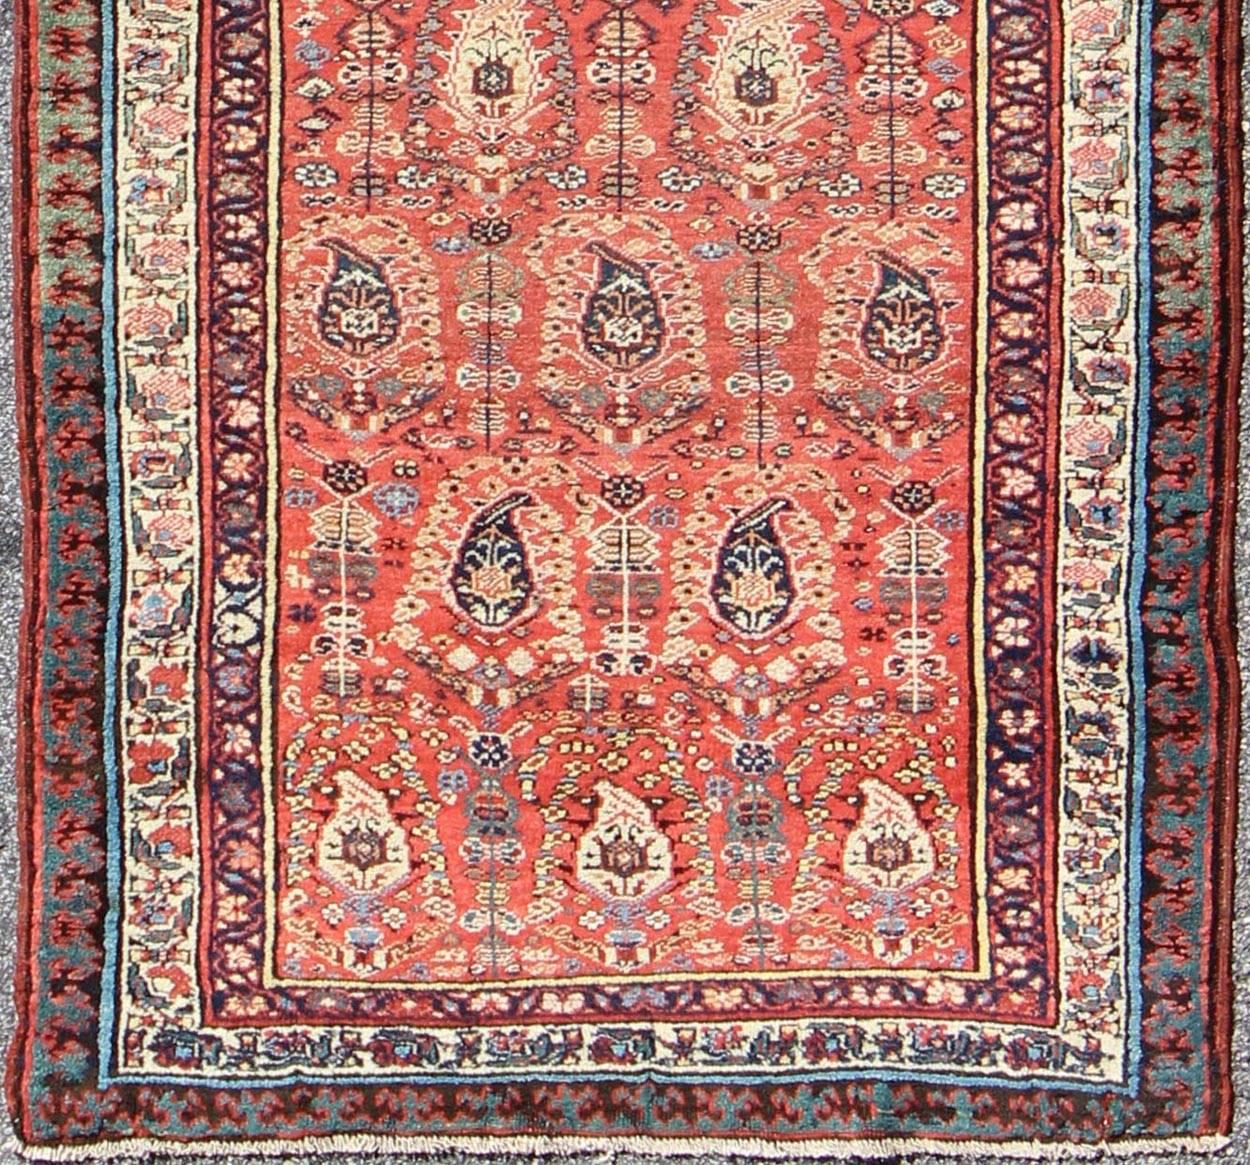 This all-over Persian Serab has a terra cotta background and an ivory border. The elegant design in the field consists of a free-flowing Paisley pattern. The blue, greens and yellows add a hint of color to this stunning runner.
Measures: 3'9 x 10'.